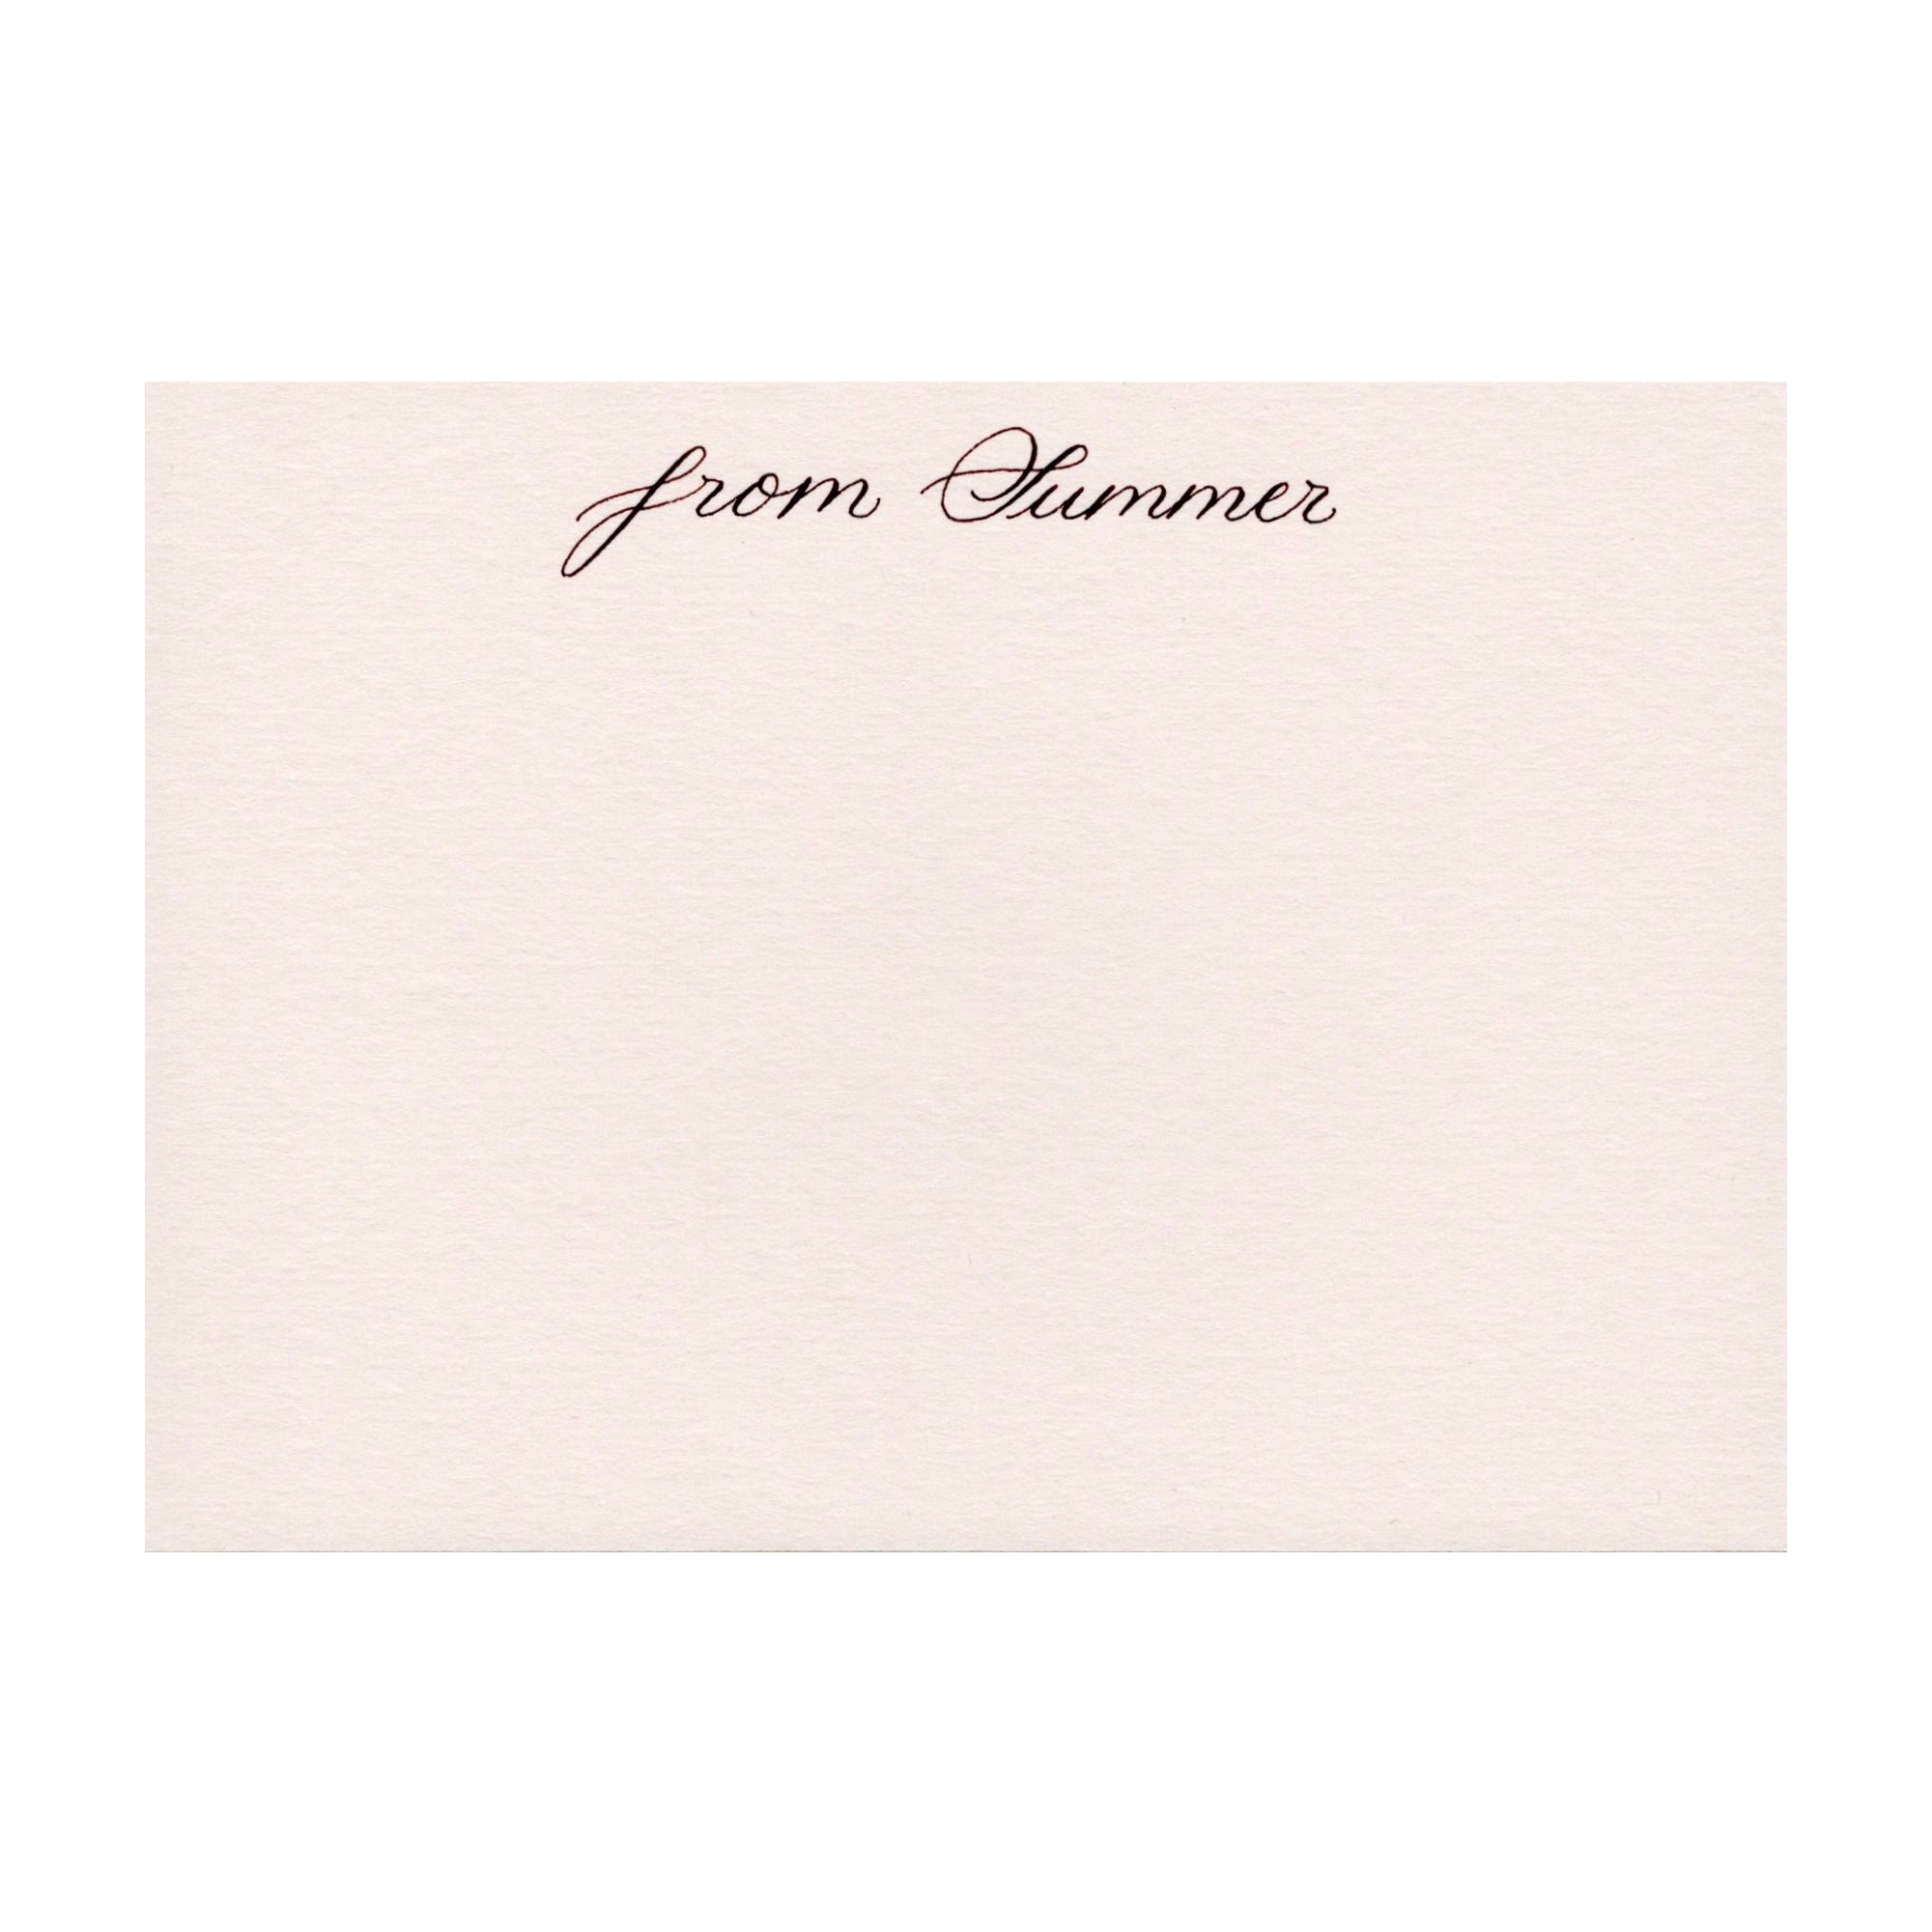 Bespoke note cards in Ballet nude pink personalised by hand with calligraphy by Memo Press